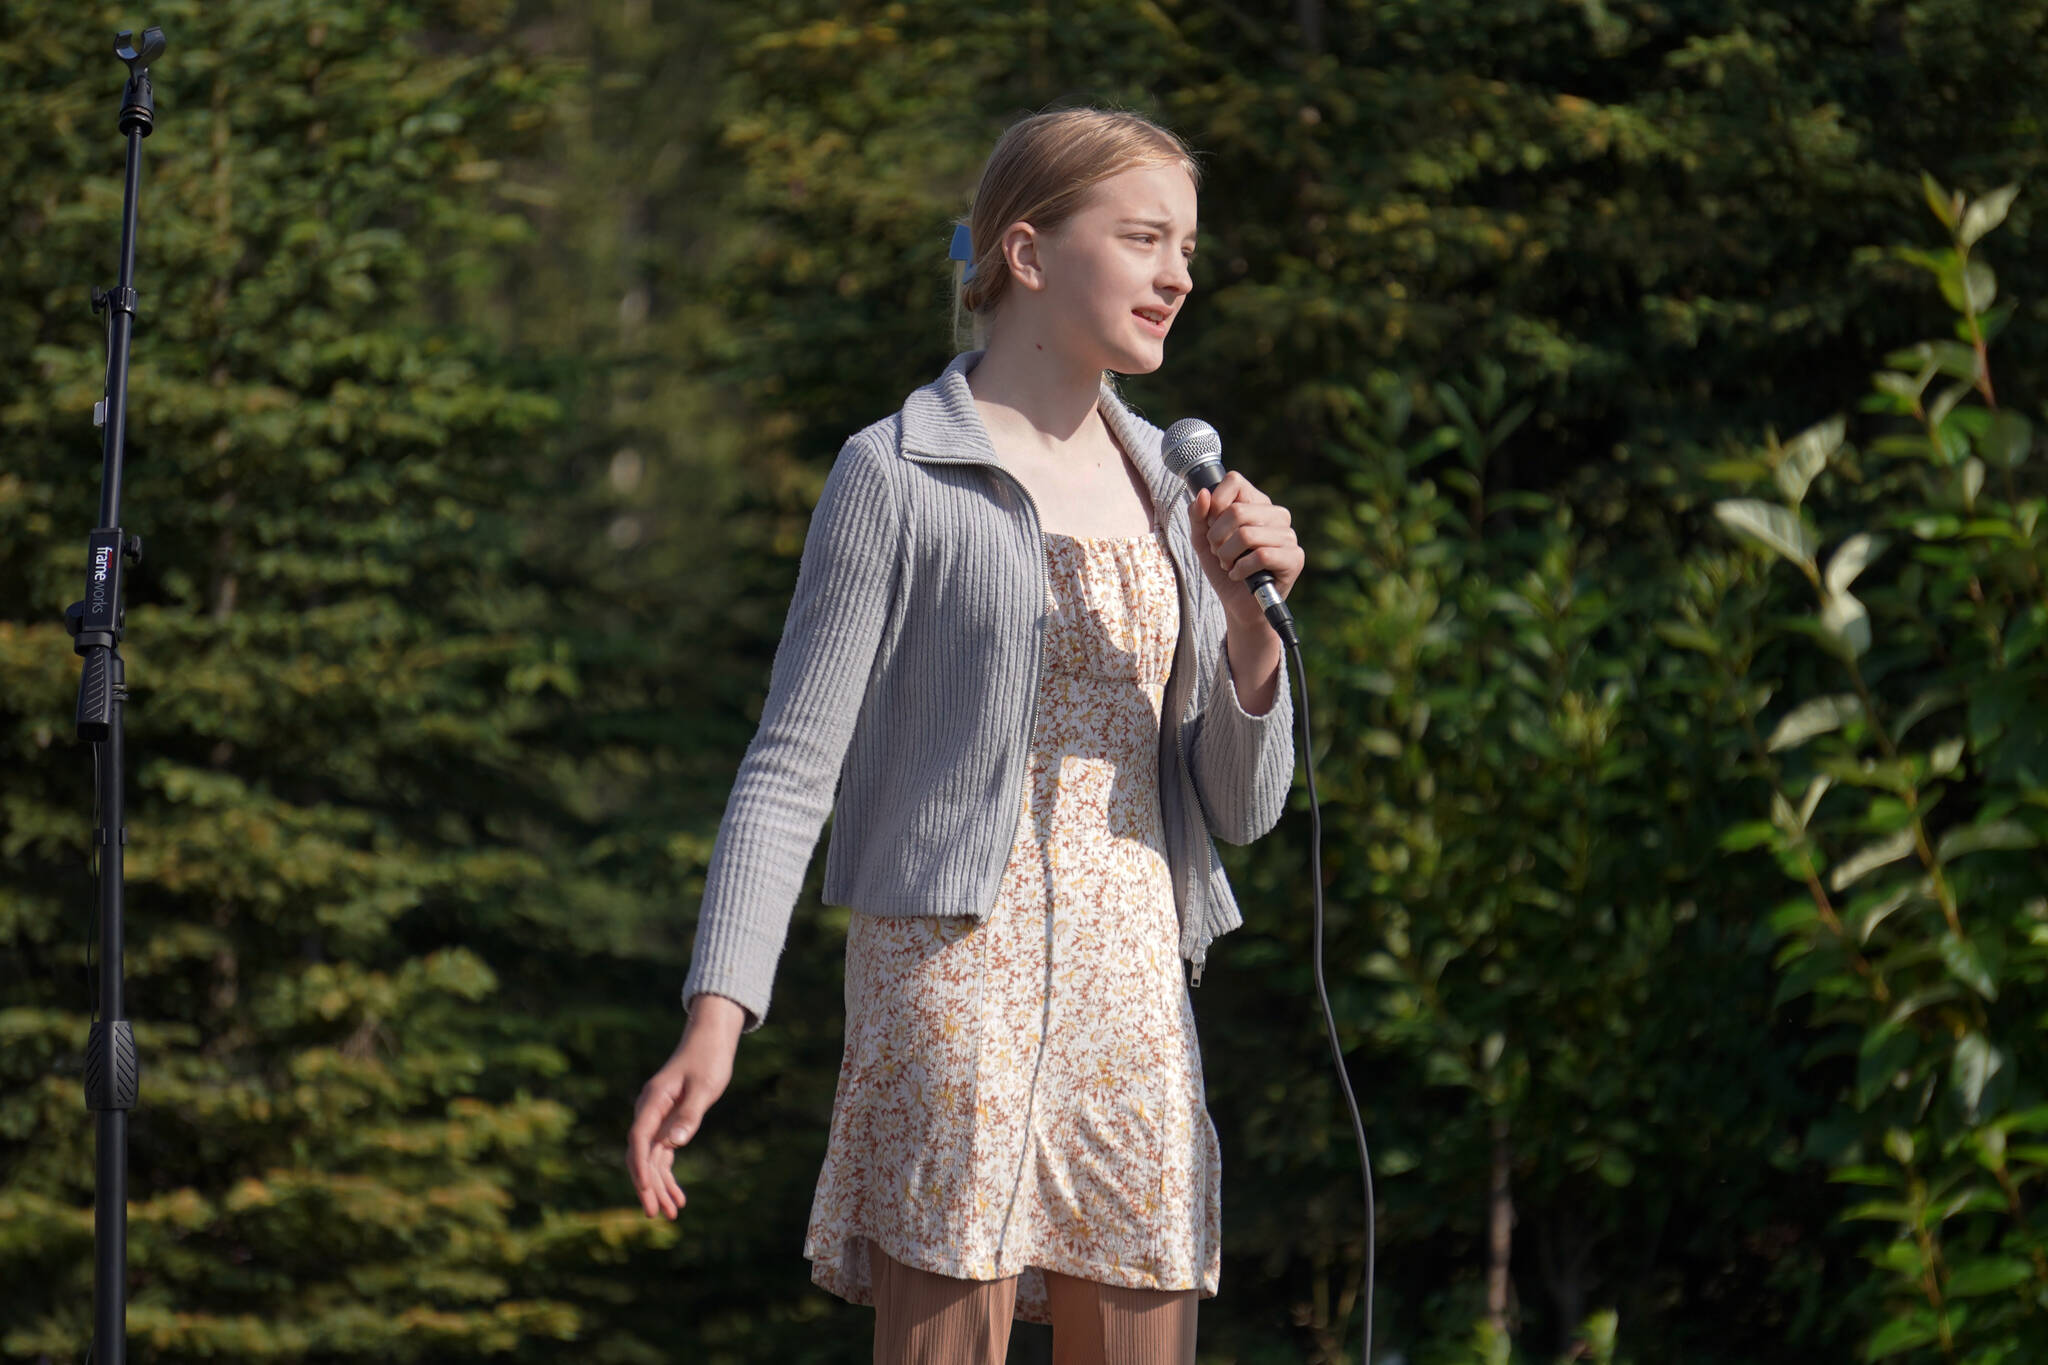 Sariah Henderson sings “Tomorrow” from “Annie” during a ceremonial groundbreaking for the future home of Triumvirate Theatre at Daubenspeck Family Park in Kenai, Alaska, on Saturday, Aug. 19, 2023. (Jake Dye/Peninsula Clarion)